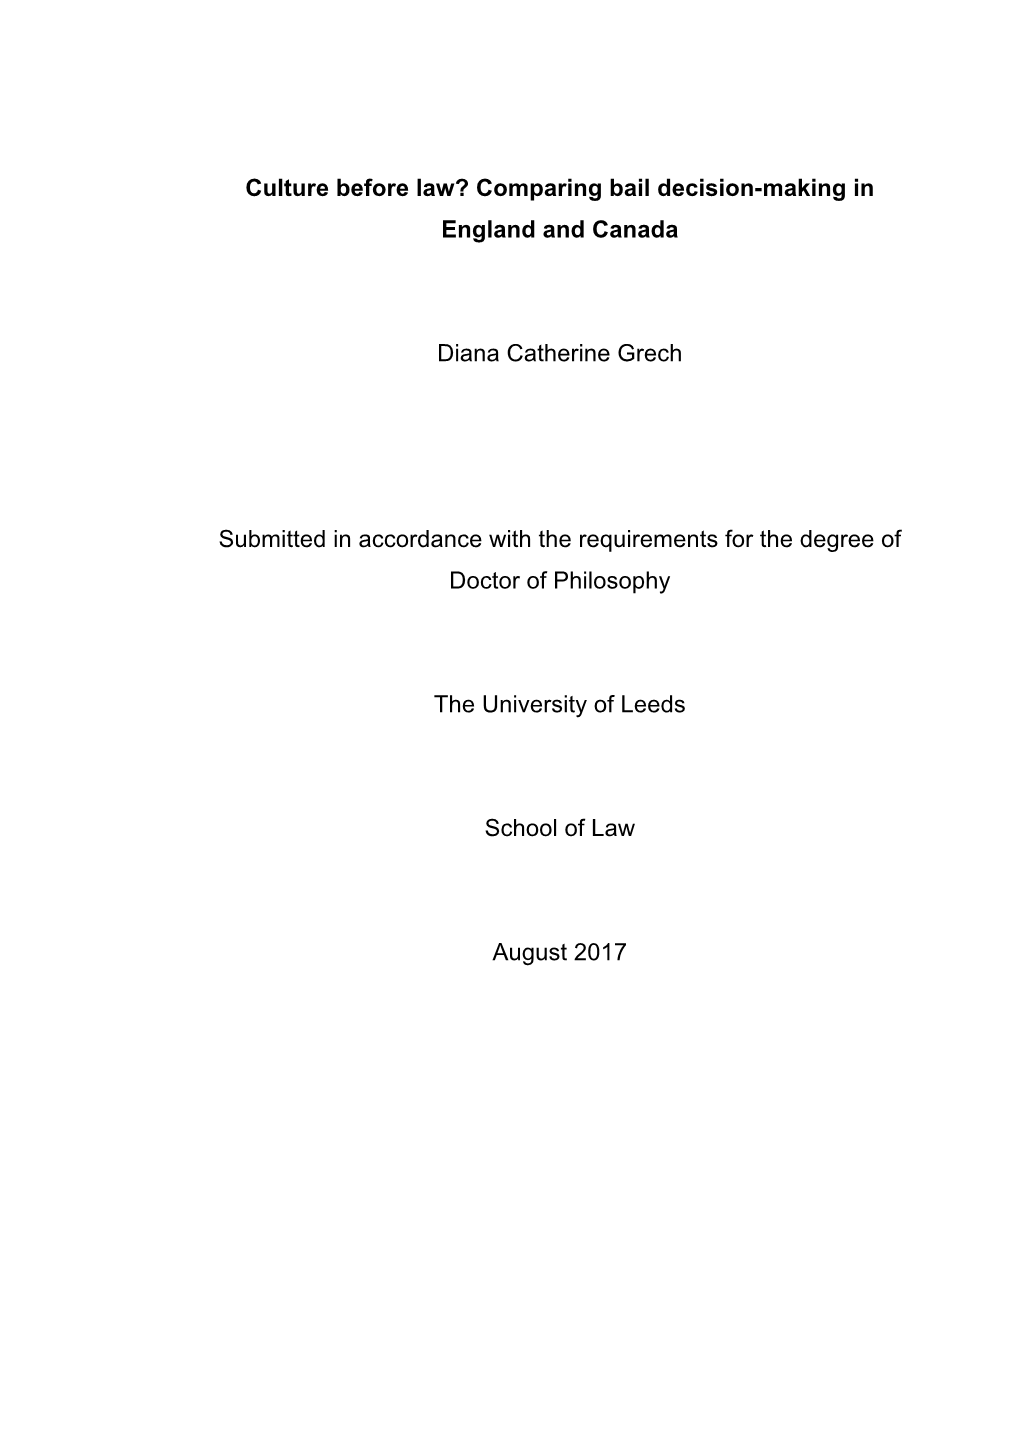 Culture Before Law? Comparing Bail Decision-Making in England and Canada